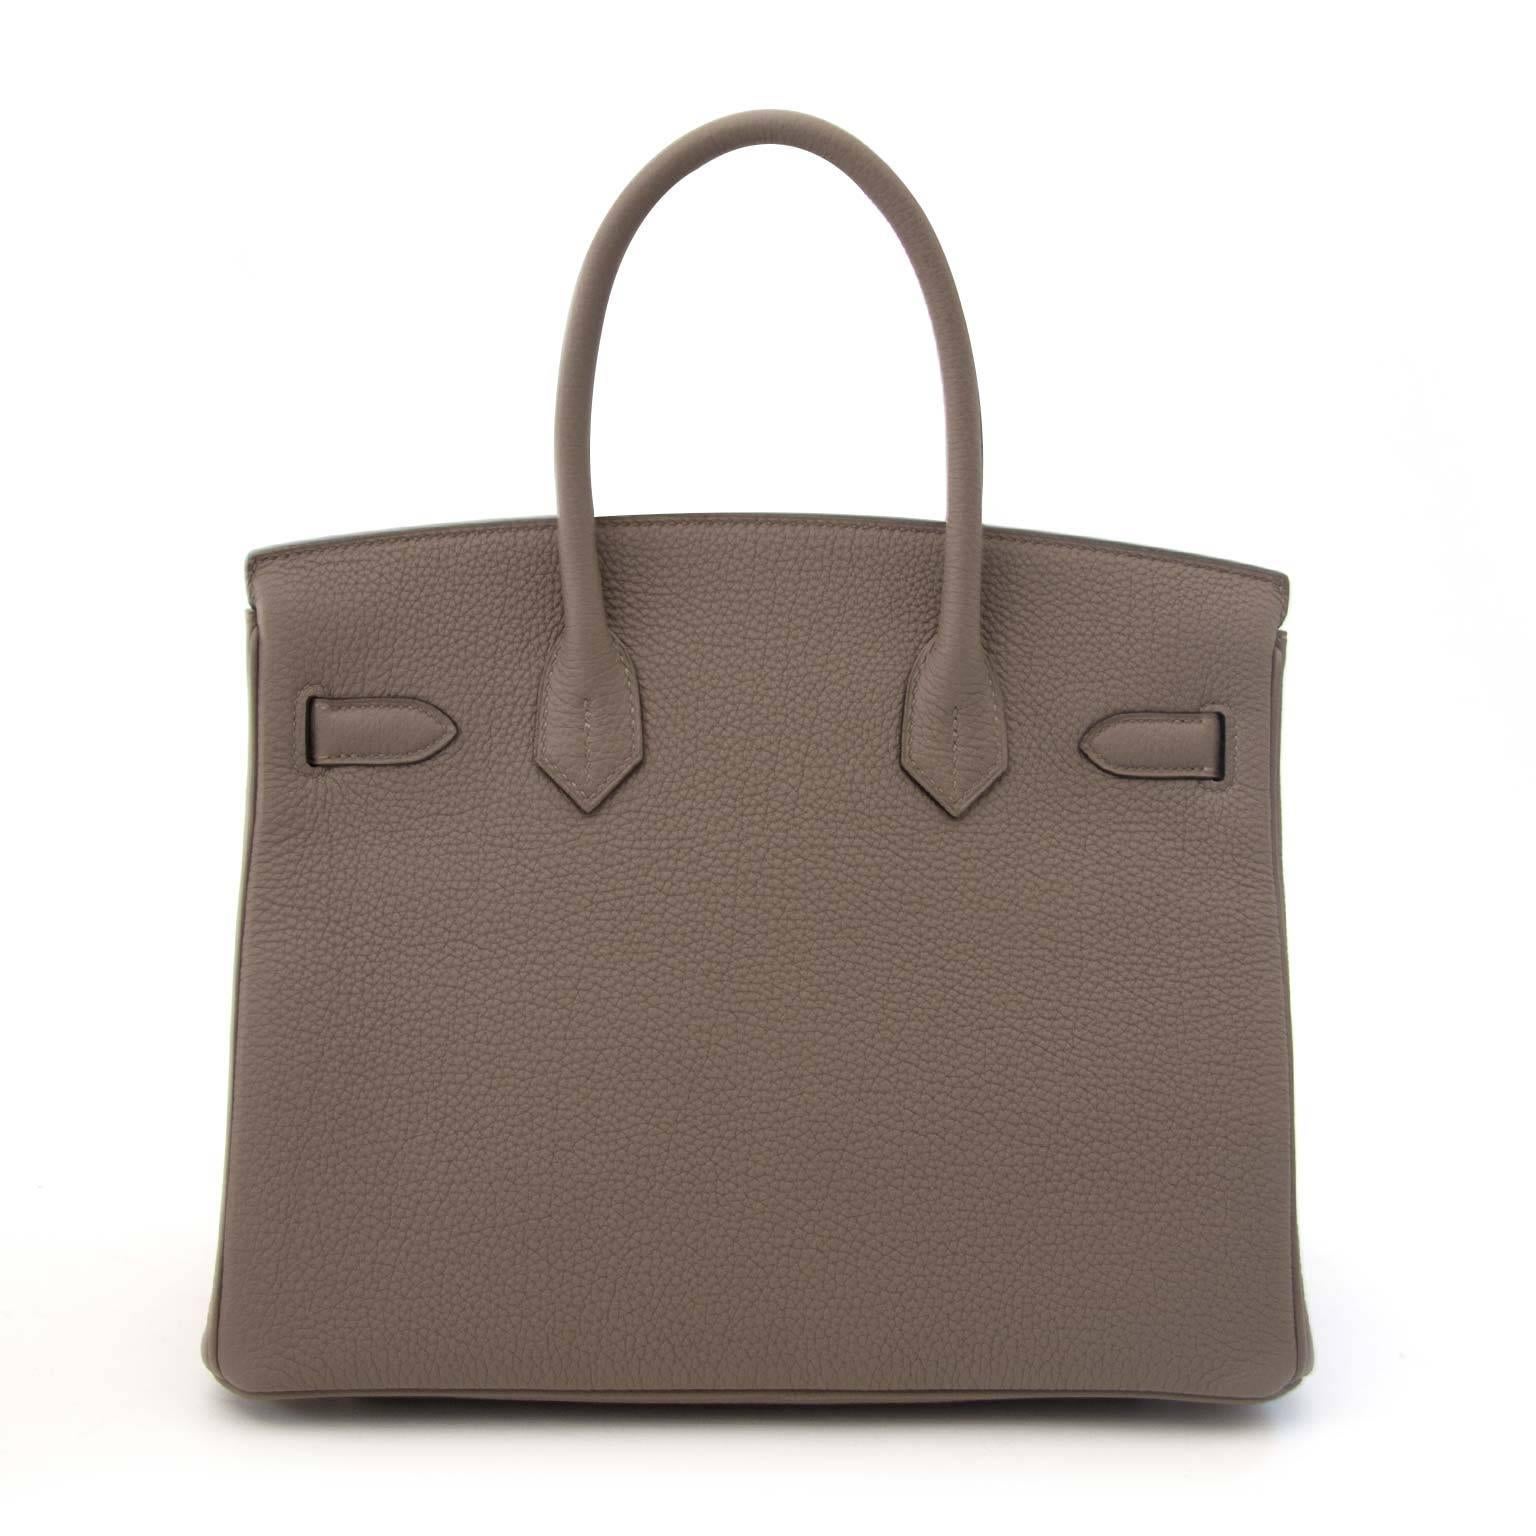 Brand New

Hermès Birkin 30 Togo Gris Asphalte phw

The Hermès Birkin bag, the most coveted bag in the world! This stunning Birkin bag comes in a grayish 'Gris Asphalte' togo leather featured by palladium hardware.

Togo leather is known for its